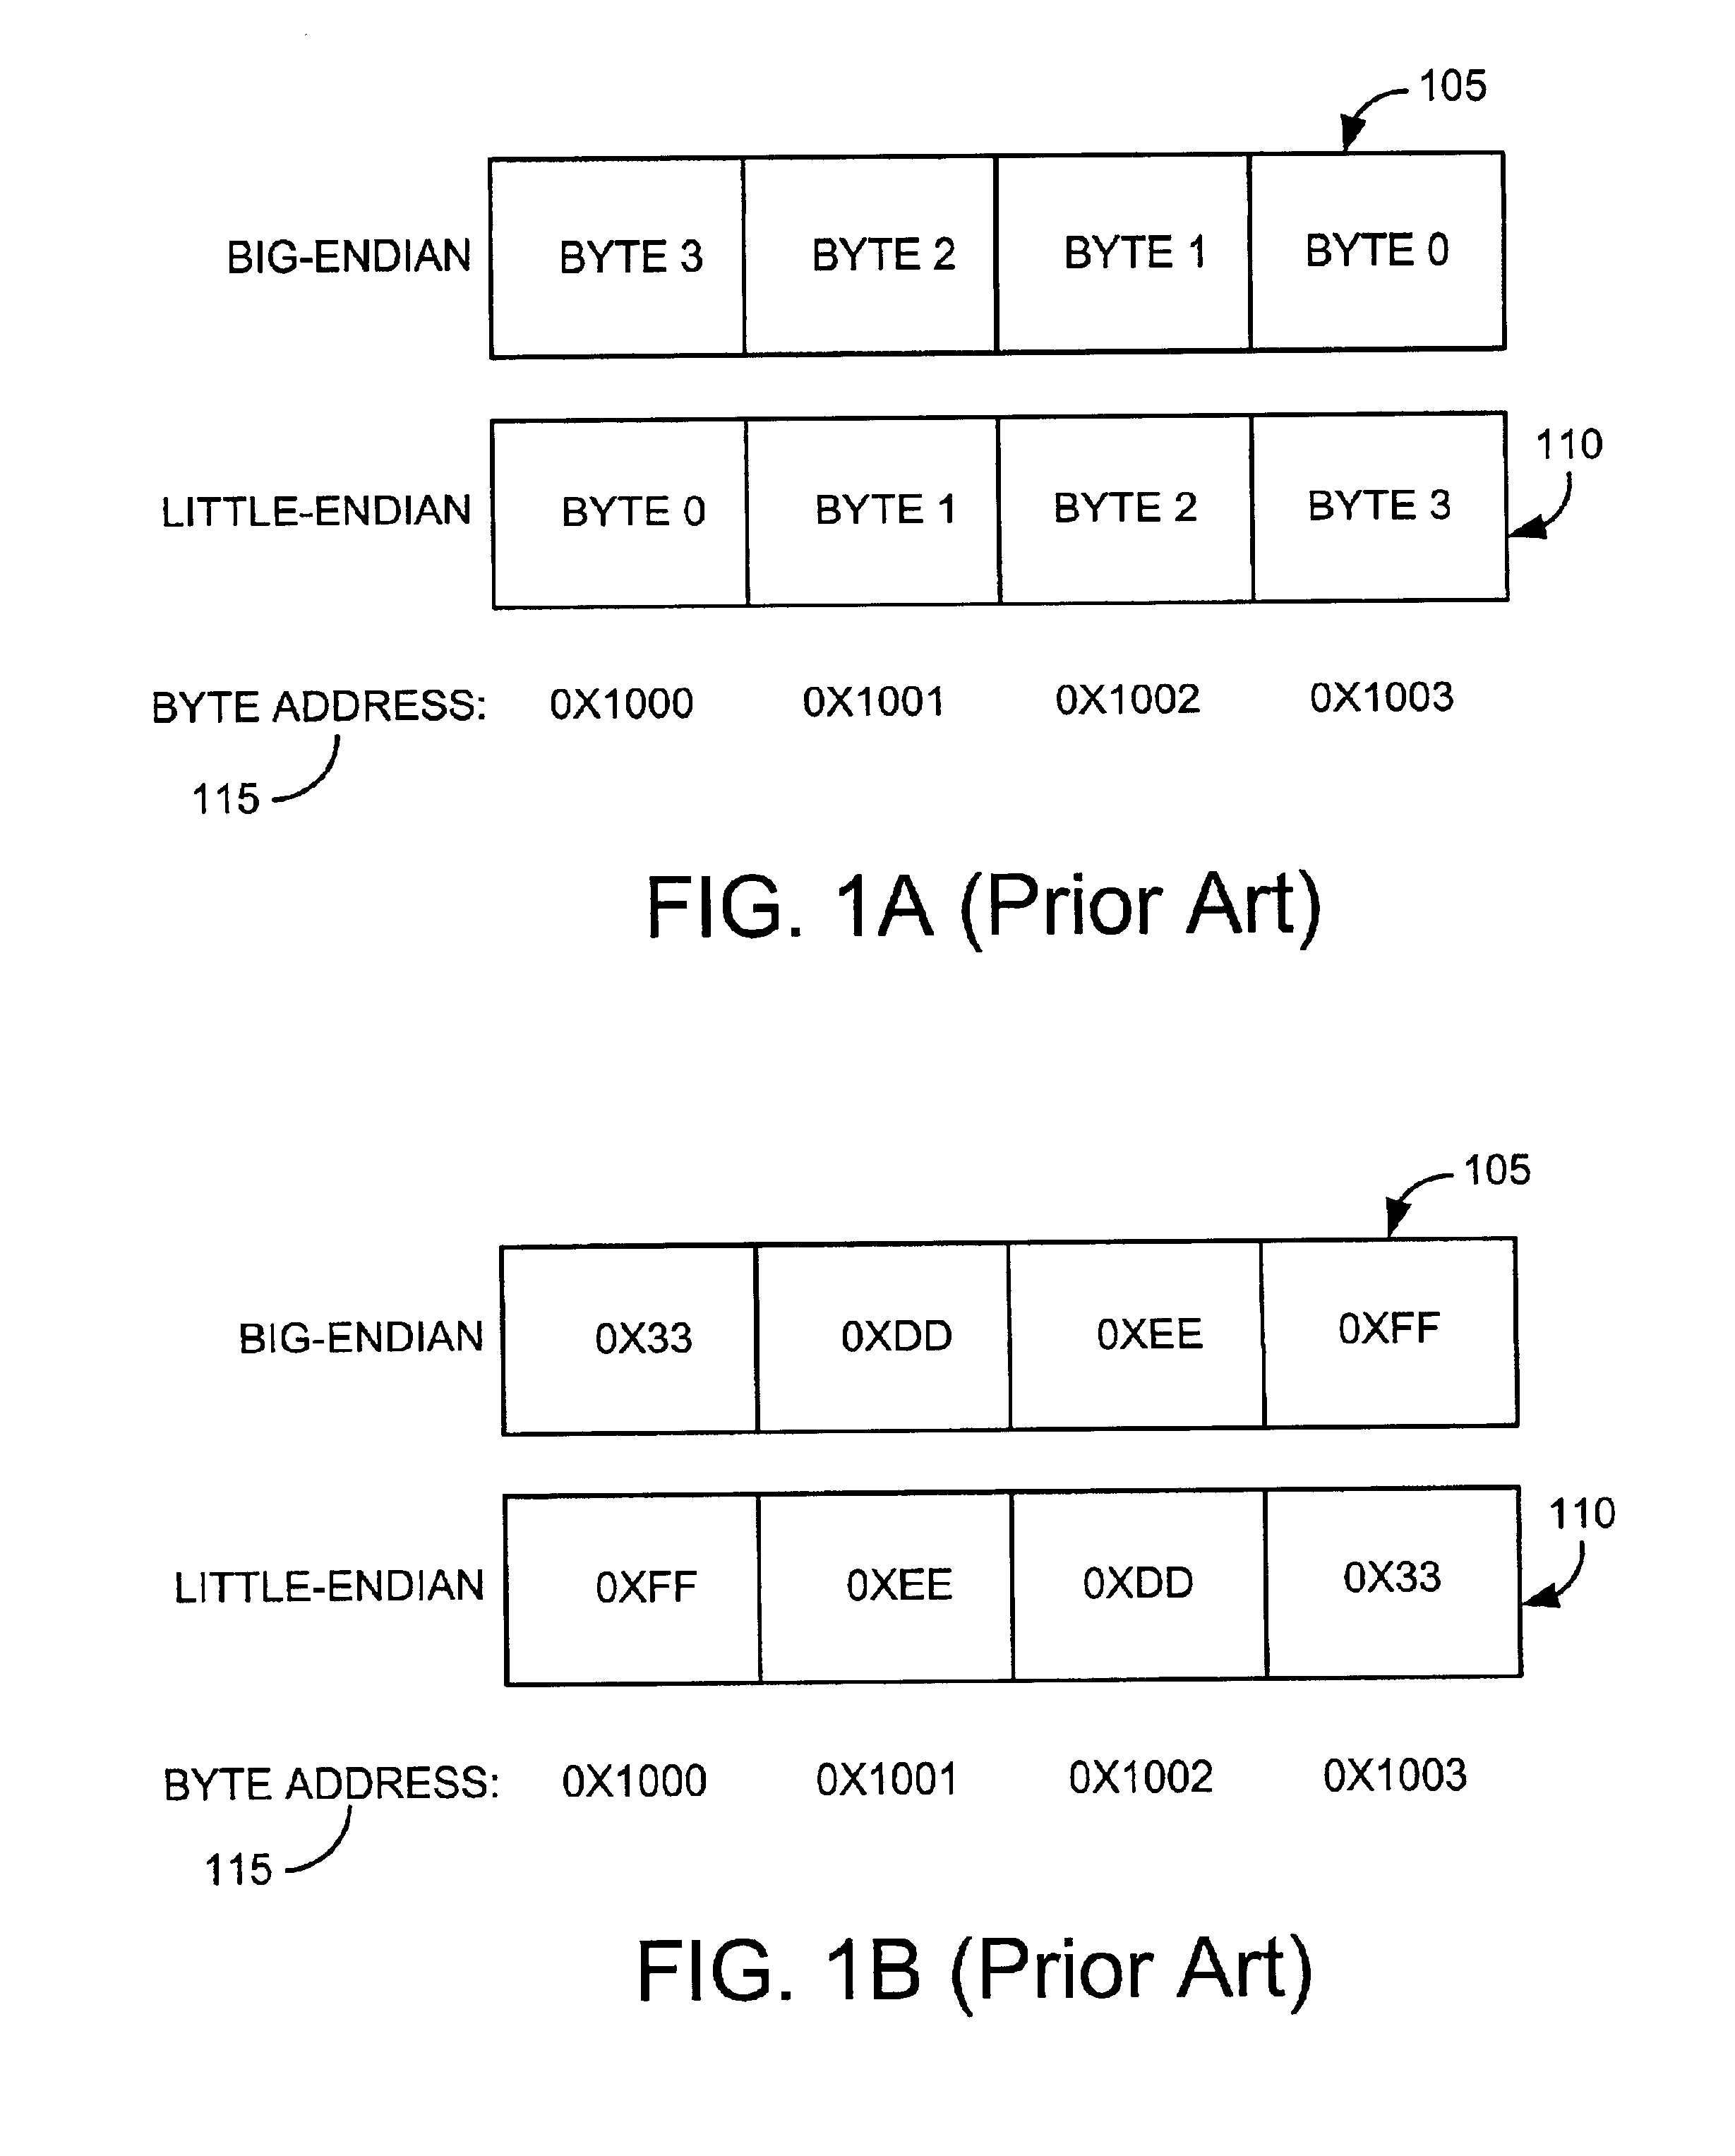 Method for transferring a packed data structure to an unpacked data structure by copying the packed data using pointer